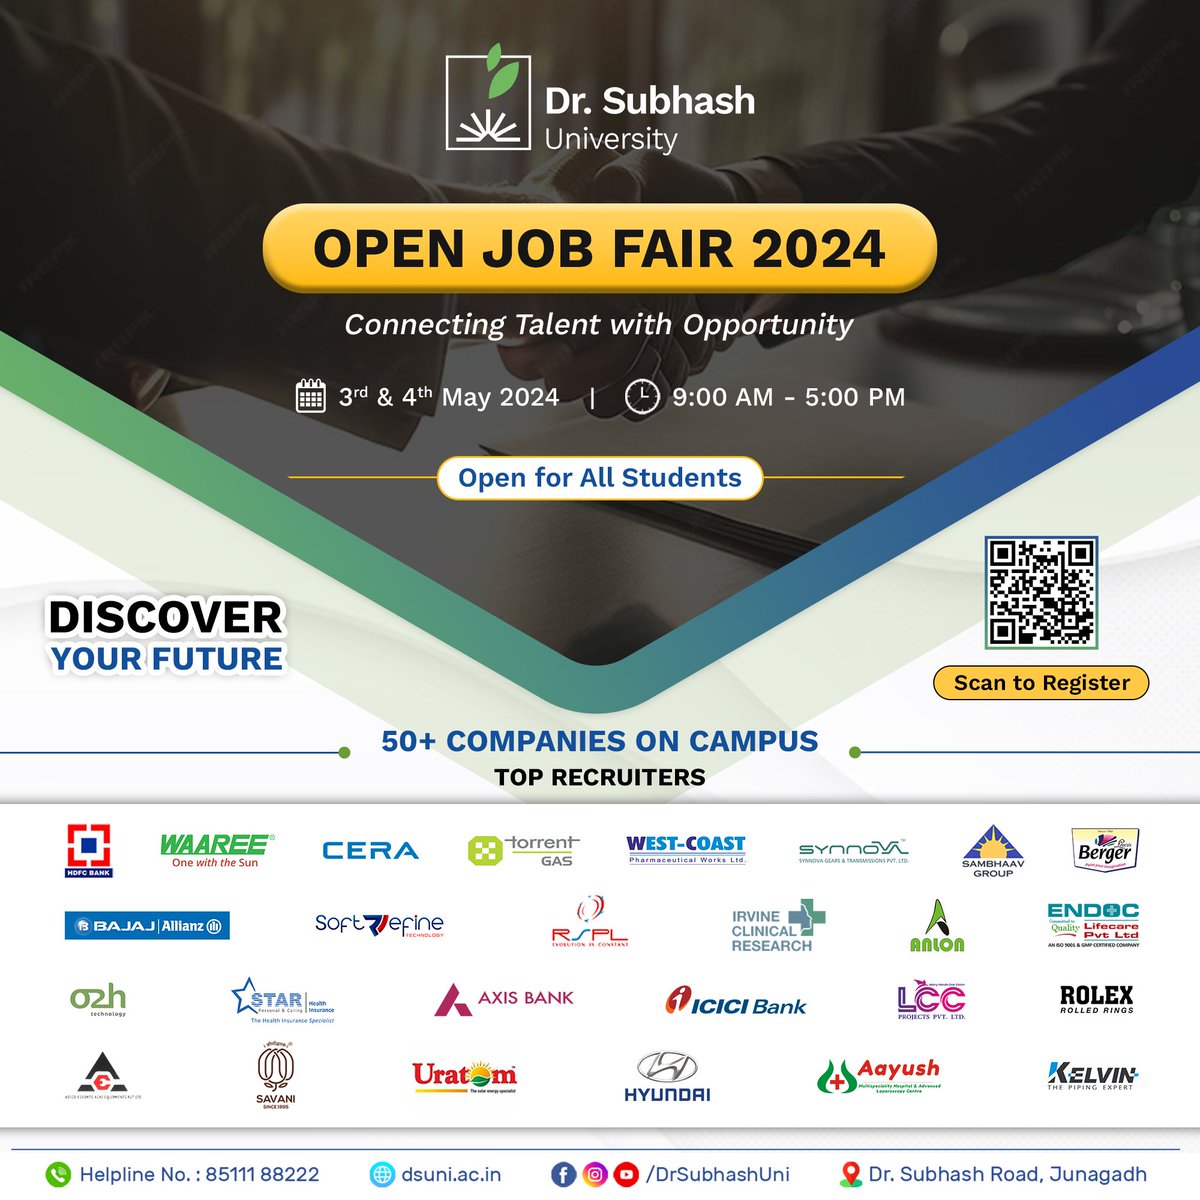 🌟 Your career journey starts here! Don't miss out on the DSU Open Job Fair 2024, happening on May 3rd & 4th, 9:00 AM to 5:00 PM. With 50+ companies waiting to meet you, it's your chance to land your dream job. #careerexploration #Openforall #DSU #DrSubhashUniversity